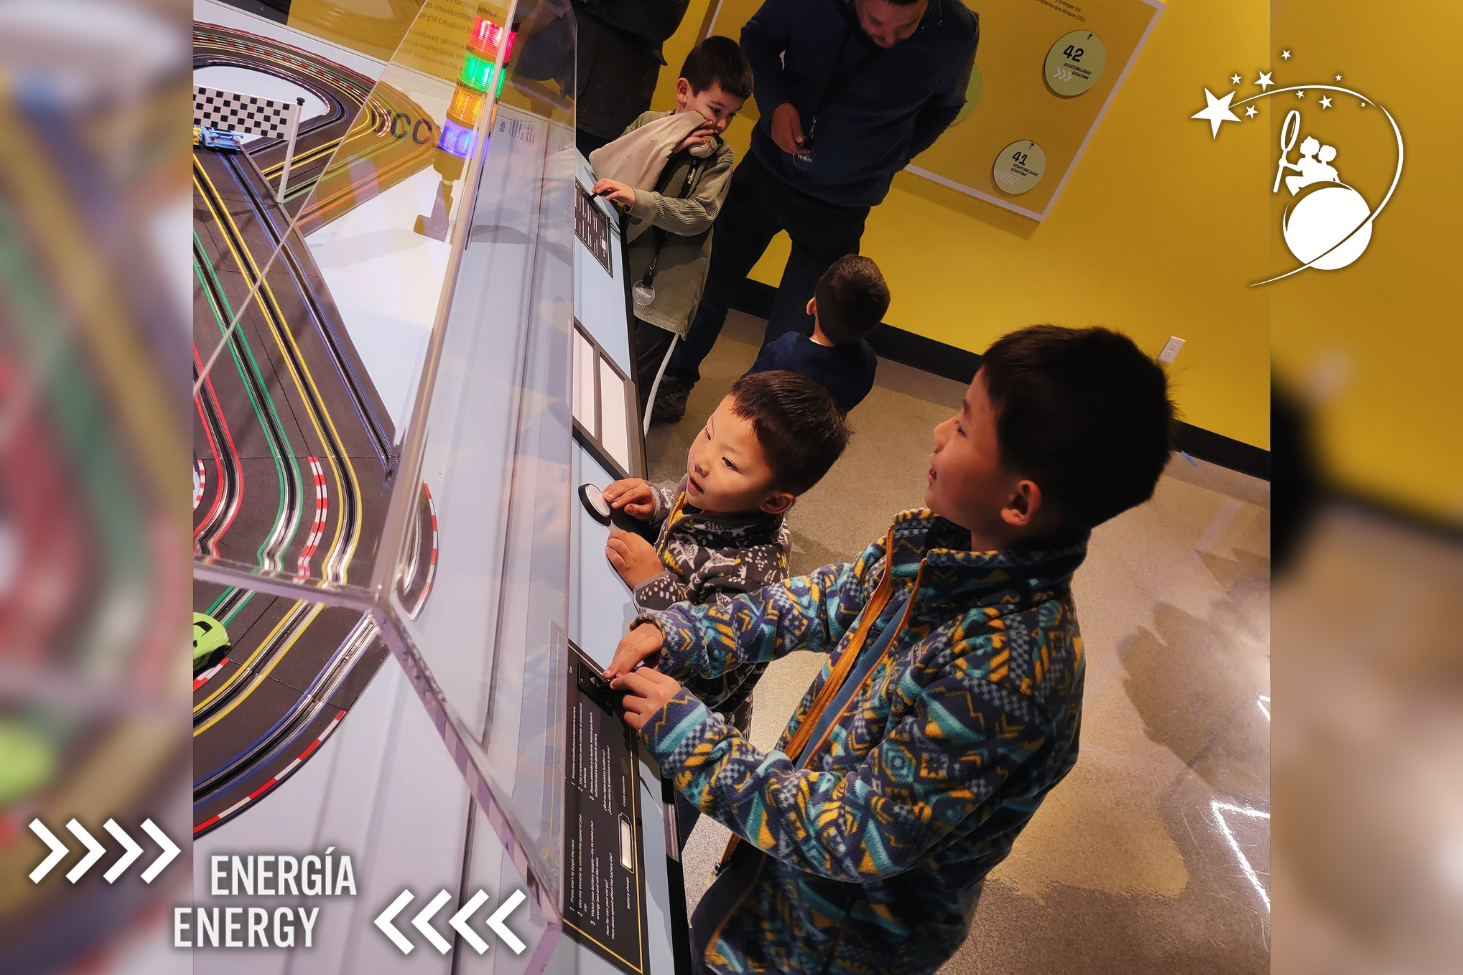 2 boys handle controls of electric toy cars at an exhibit at the Discovery Children's Museum